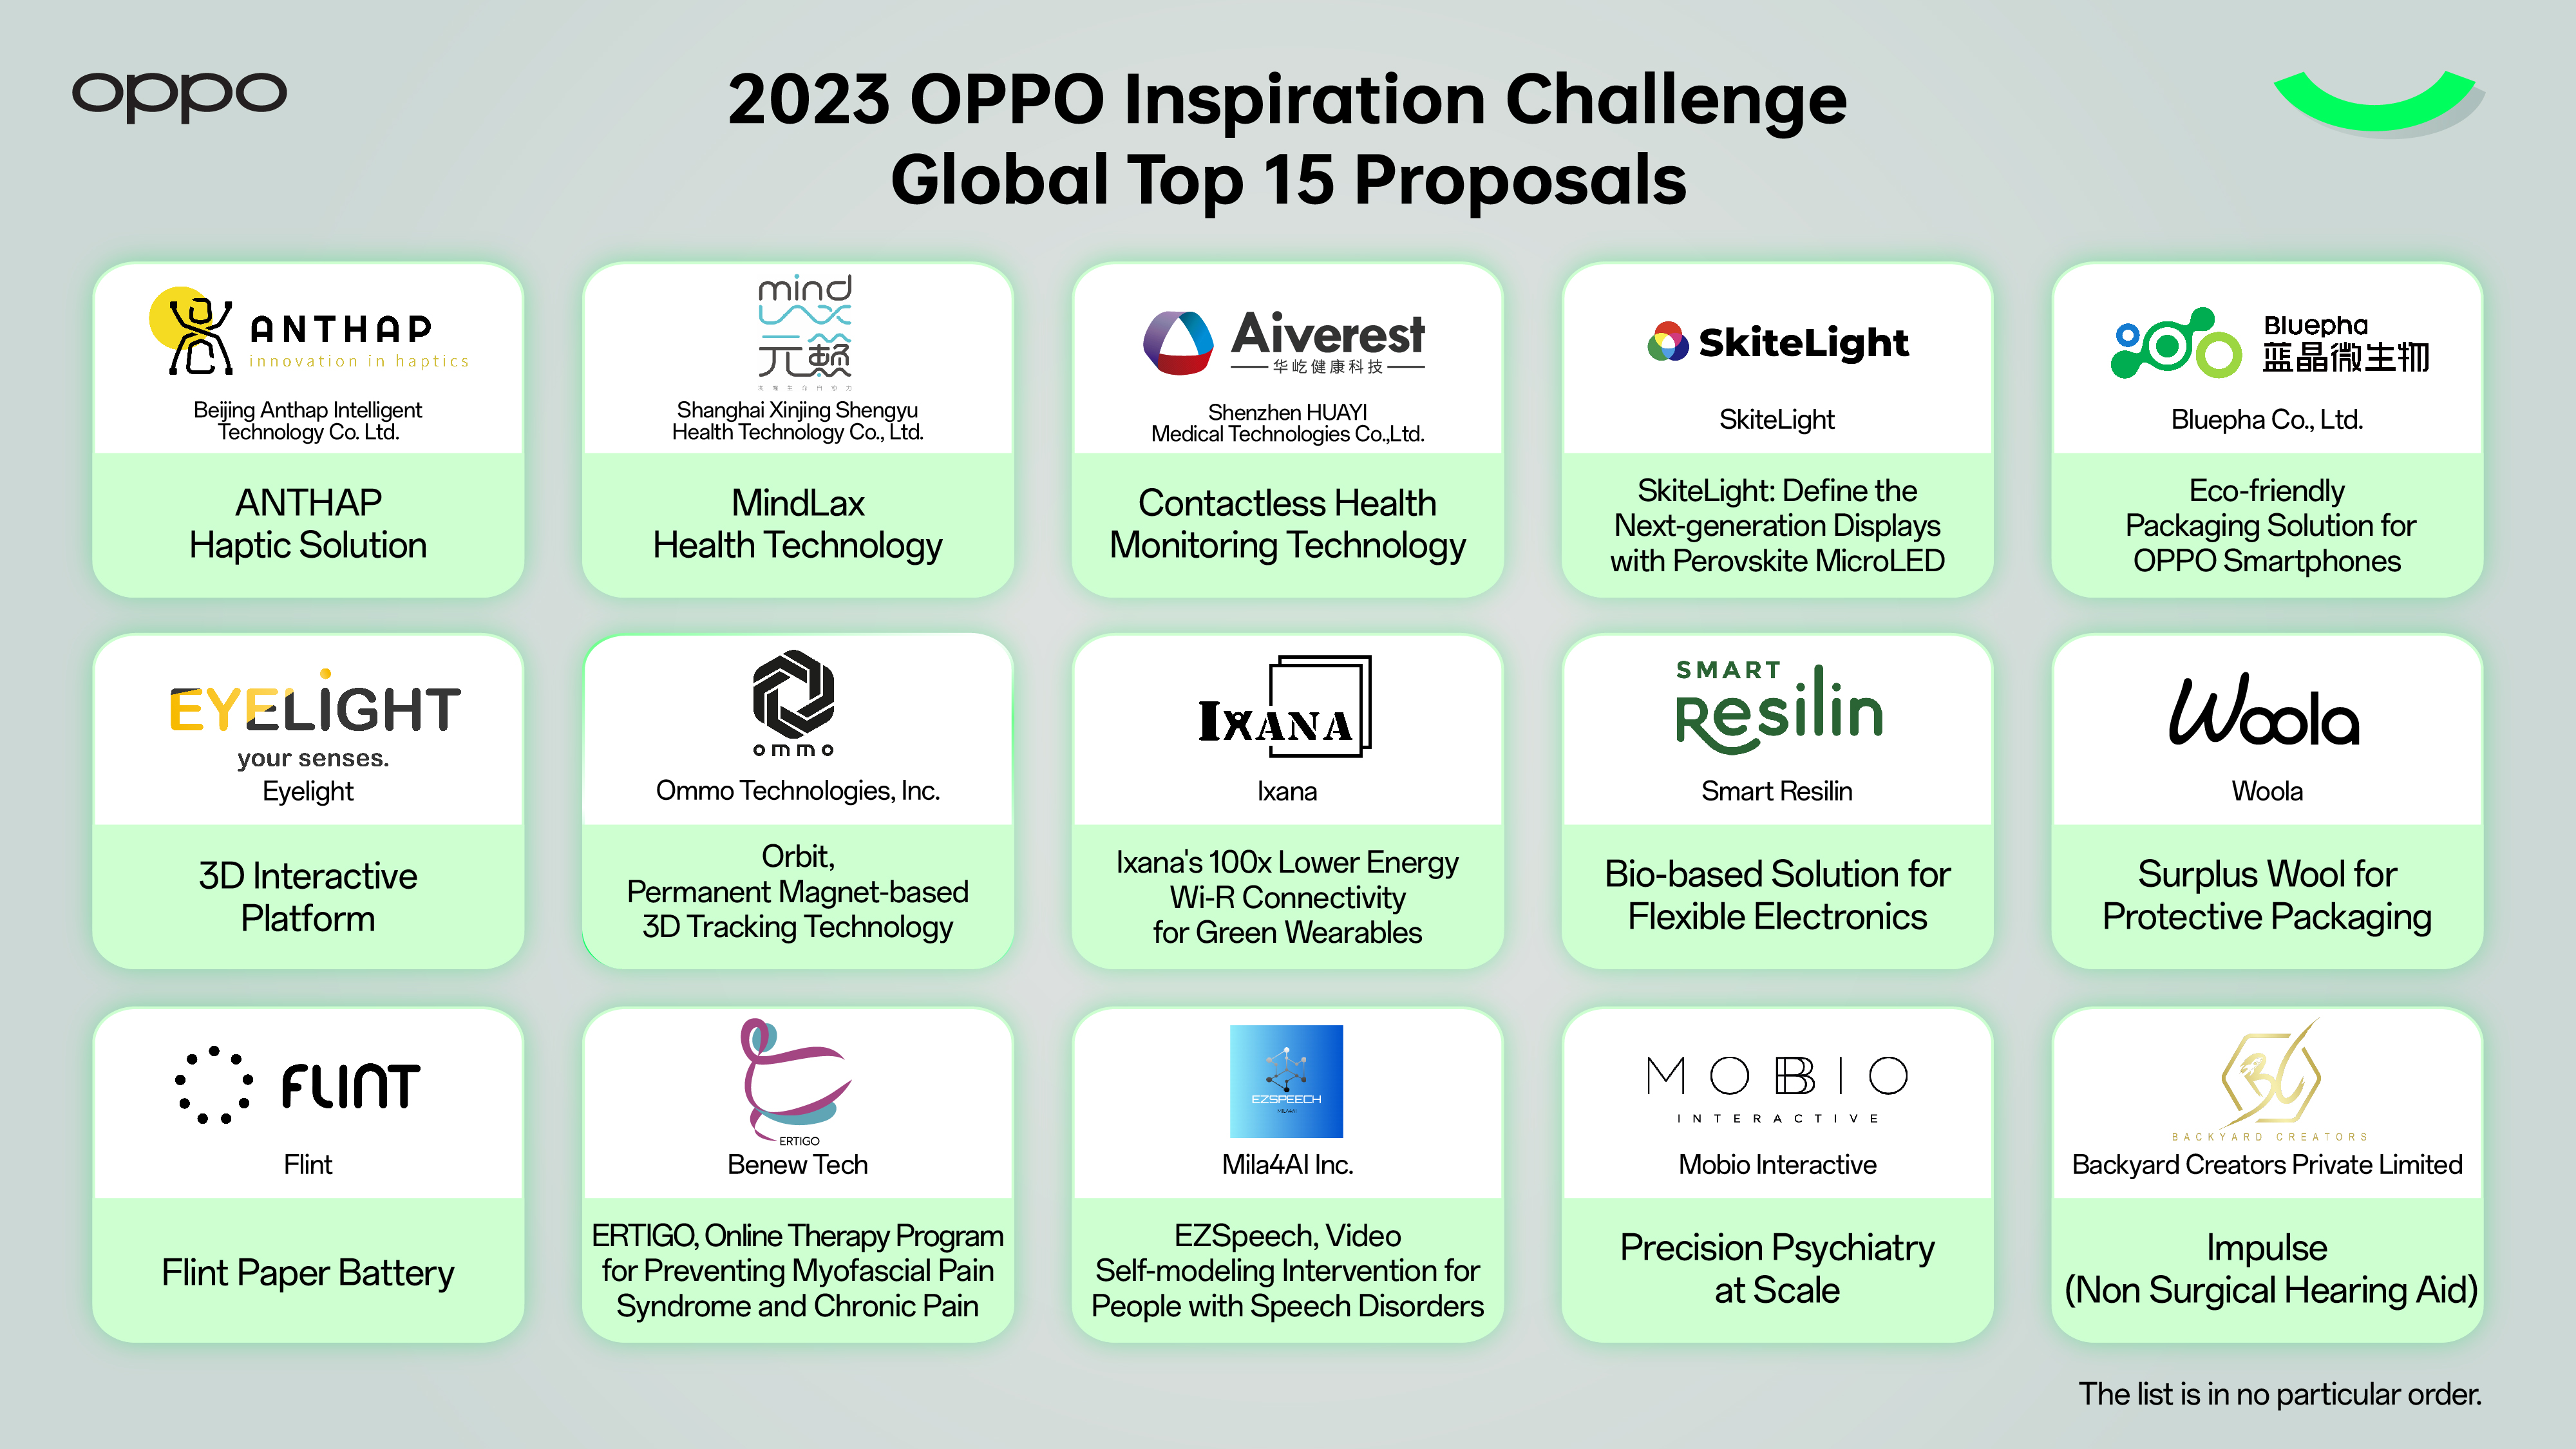 OPPO Inspiration Challenge Global Top 15 Proposals